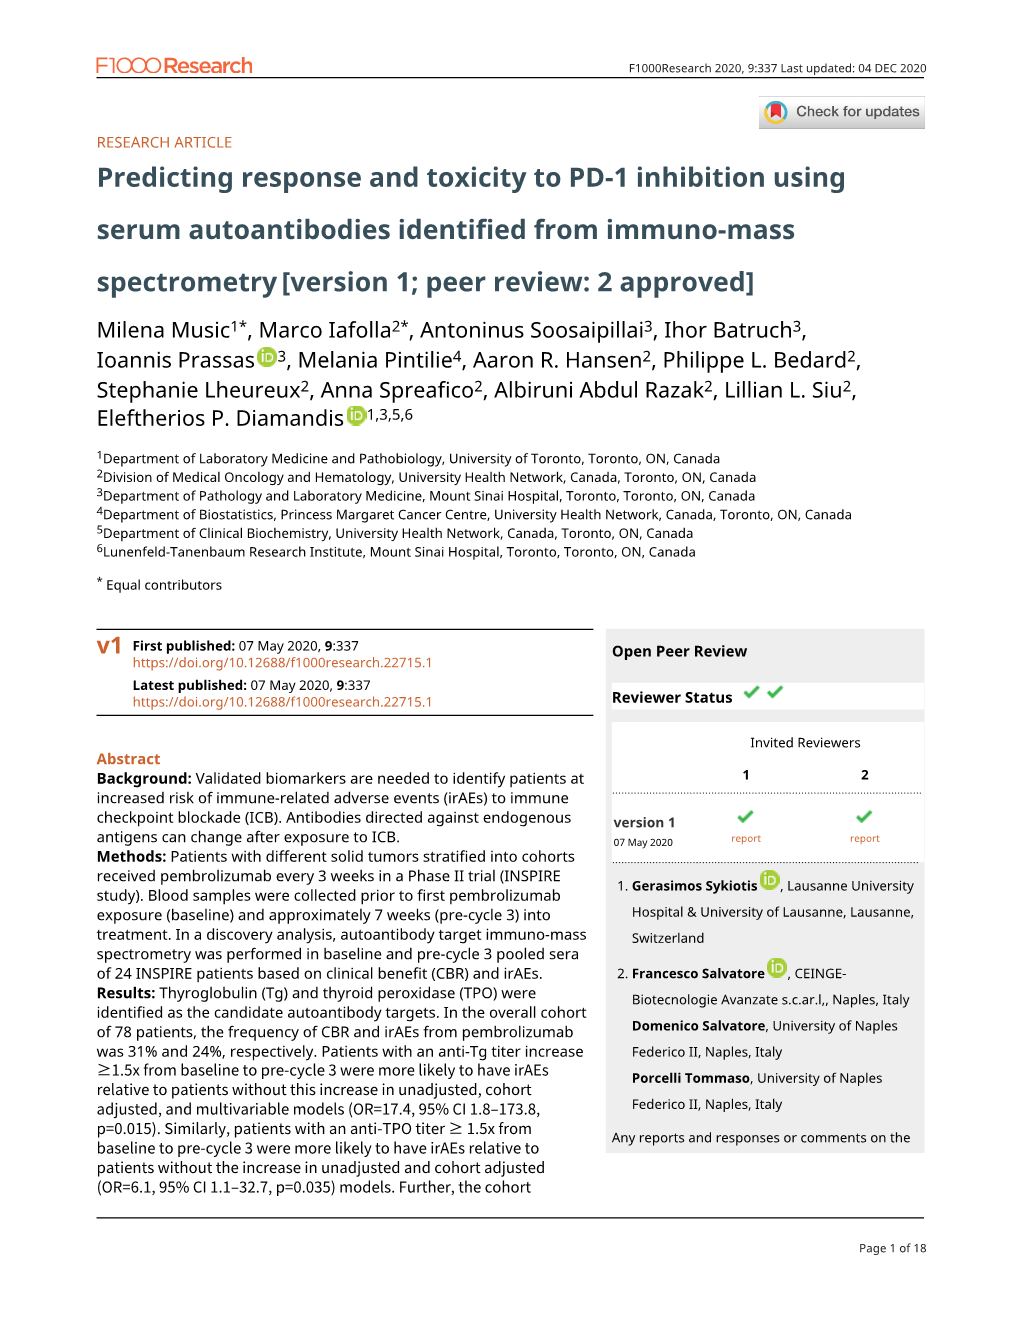 Predicting Response and Toxicity to PD-1 Inhibition Using Serum Autoantibodies Identified from Immuno-Mass Spectrometry [Version 1; Peer Review: 2 Approved]